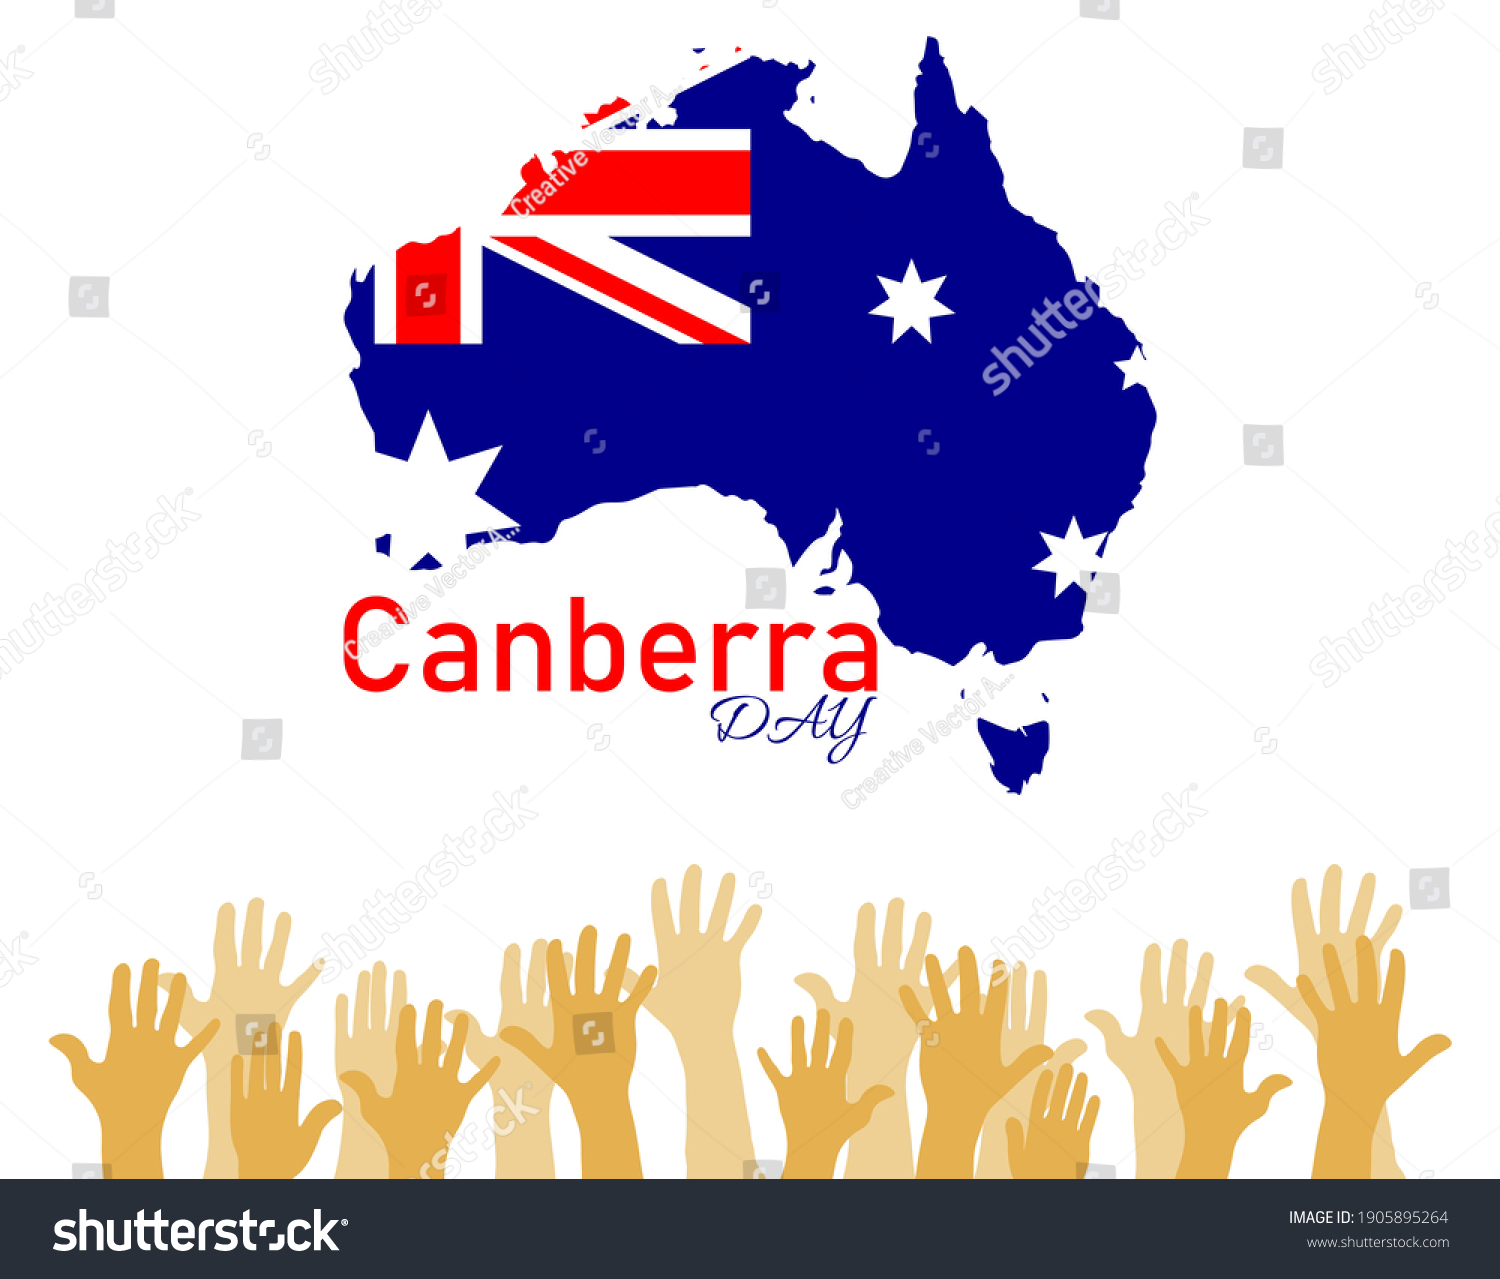 SVG of Canberra Day Australia. It is on Second Monday of March in honor of its official naming (Canberra) on March 12, 1913 in the Australian Capital Territory and the Jervis Bay Territory. svg